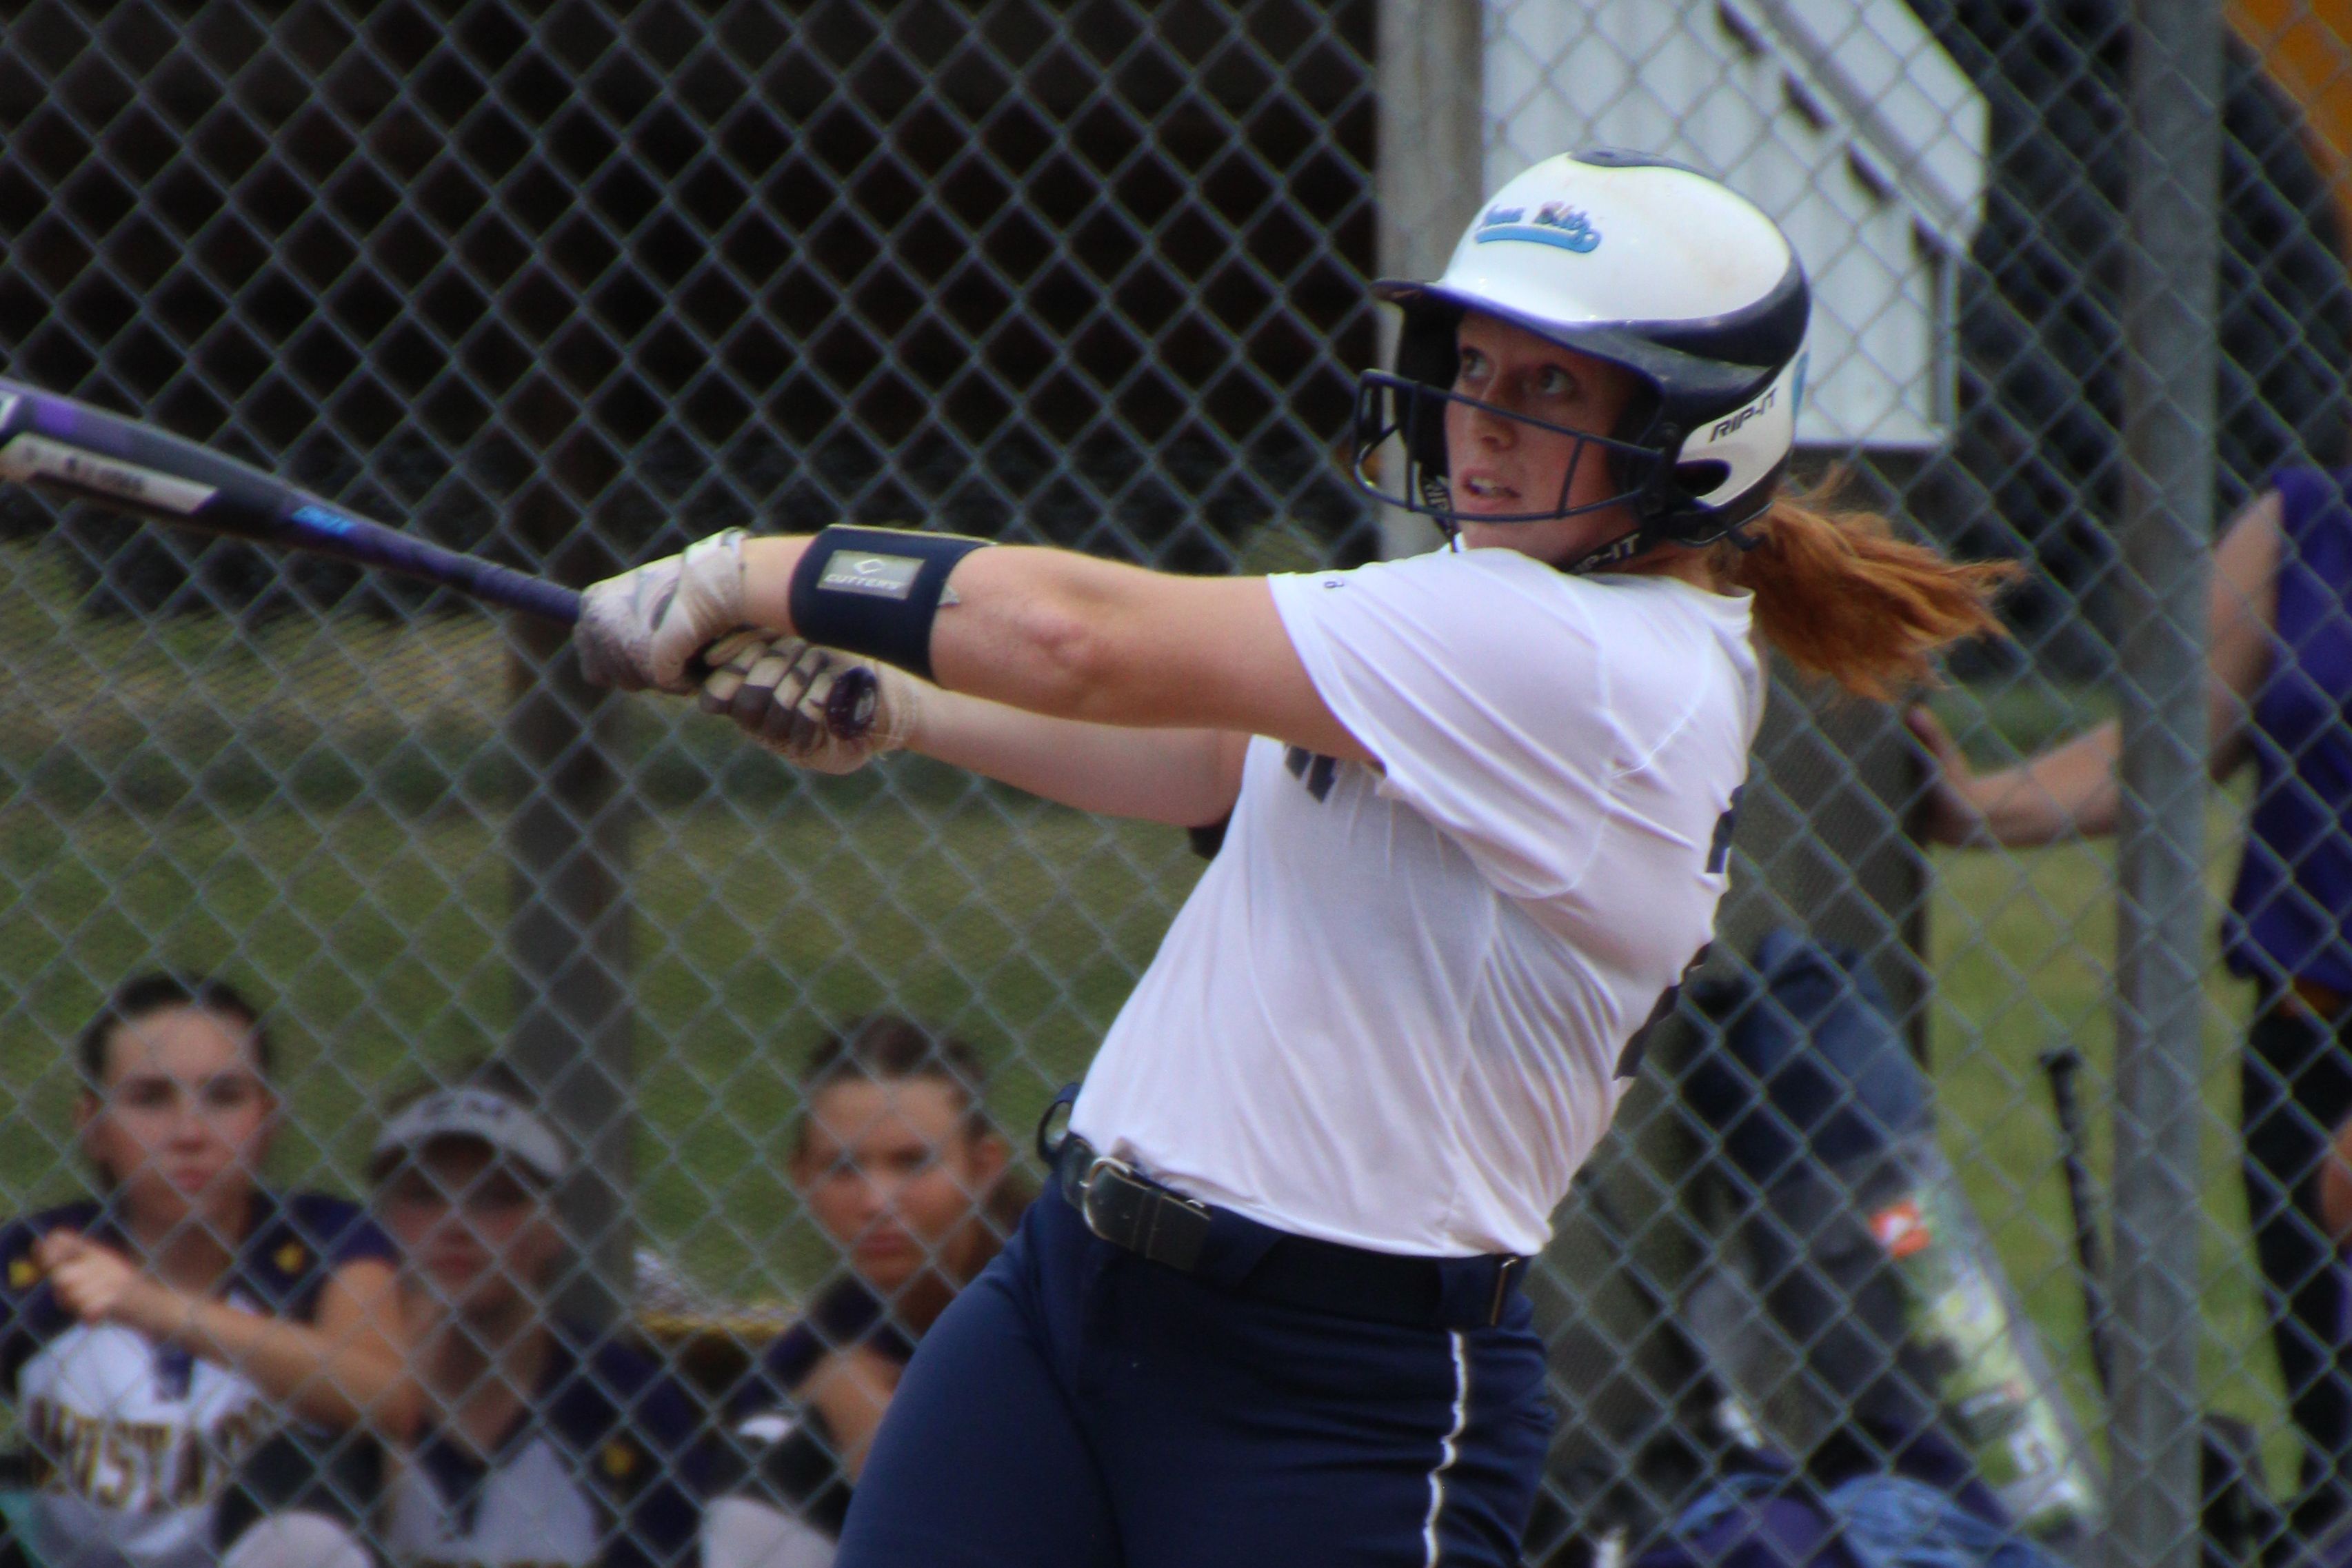 AGWSR&#039;s MaKenna Kuper set the new school record for career home runs and ended her high school career as a five-time all-state selection. The Cougars bowed out in the regional semifinal in 2021. (Jake Ryder photo)